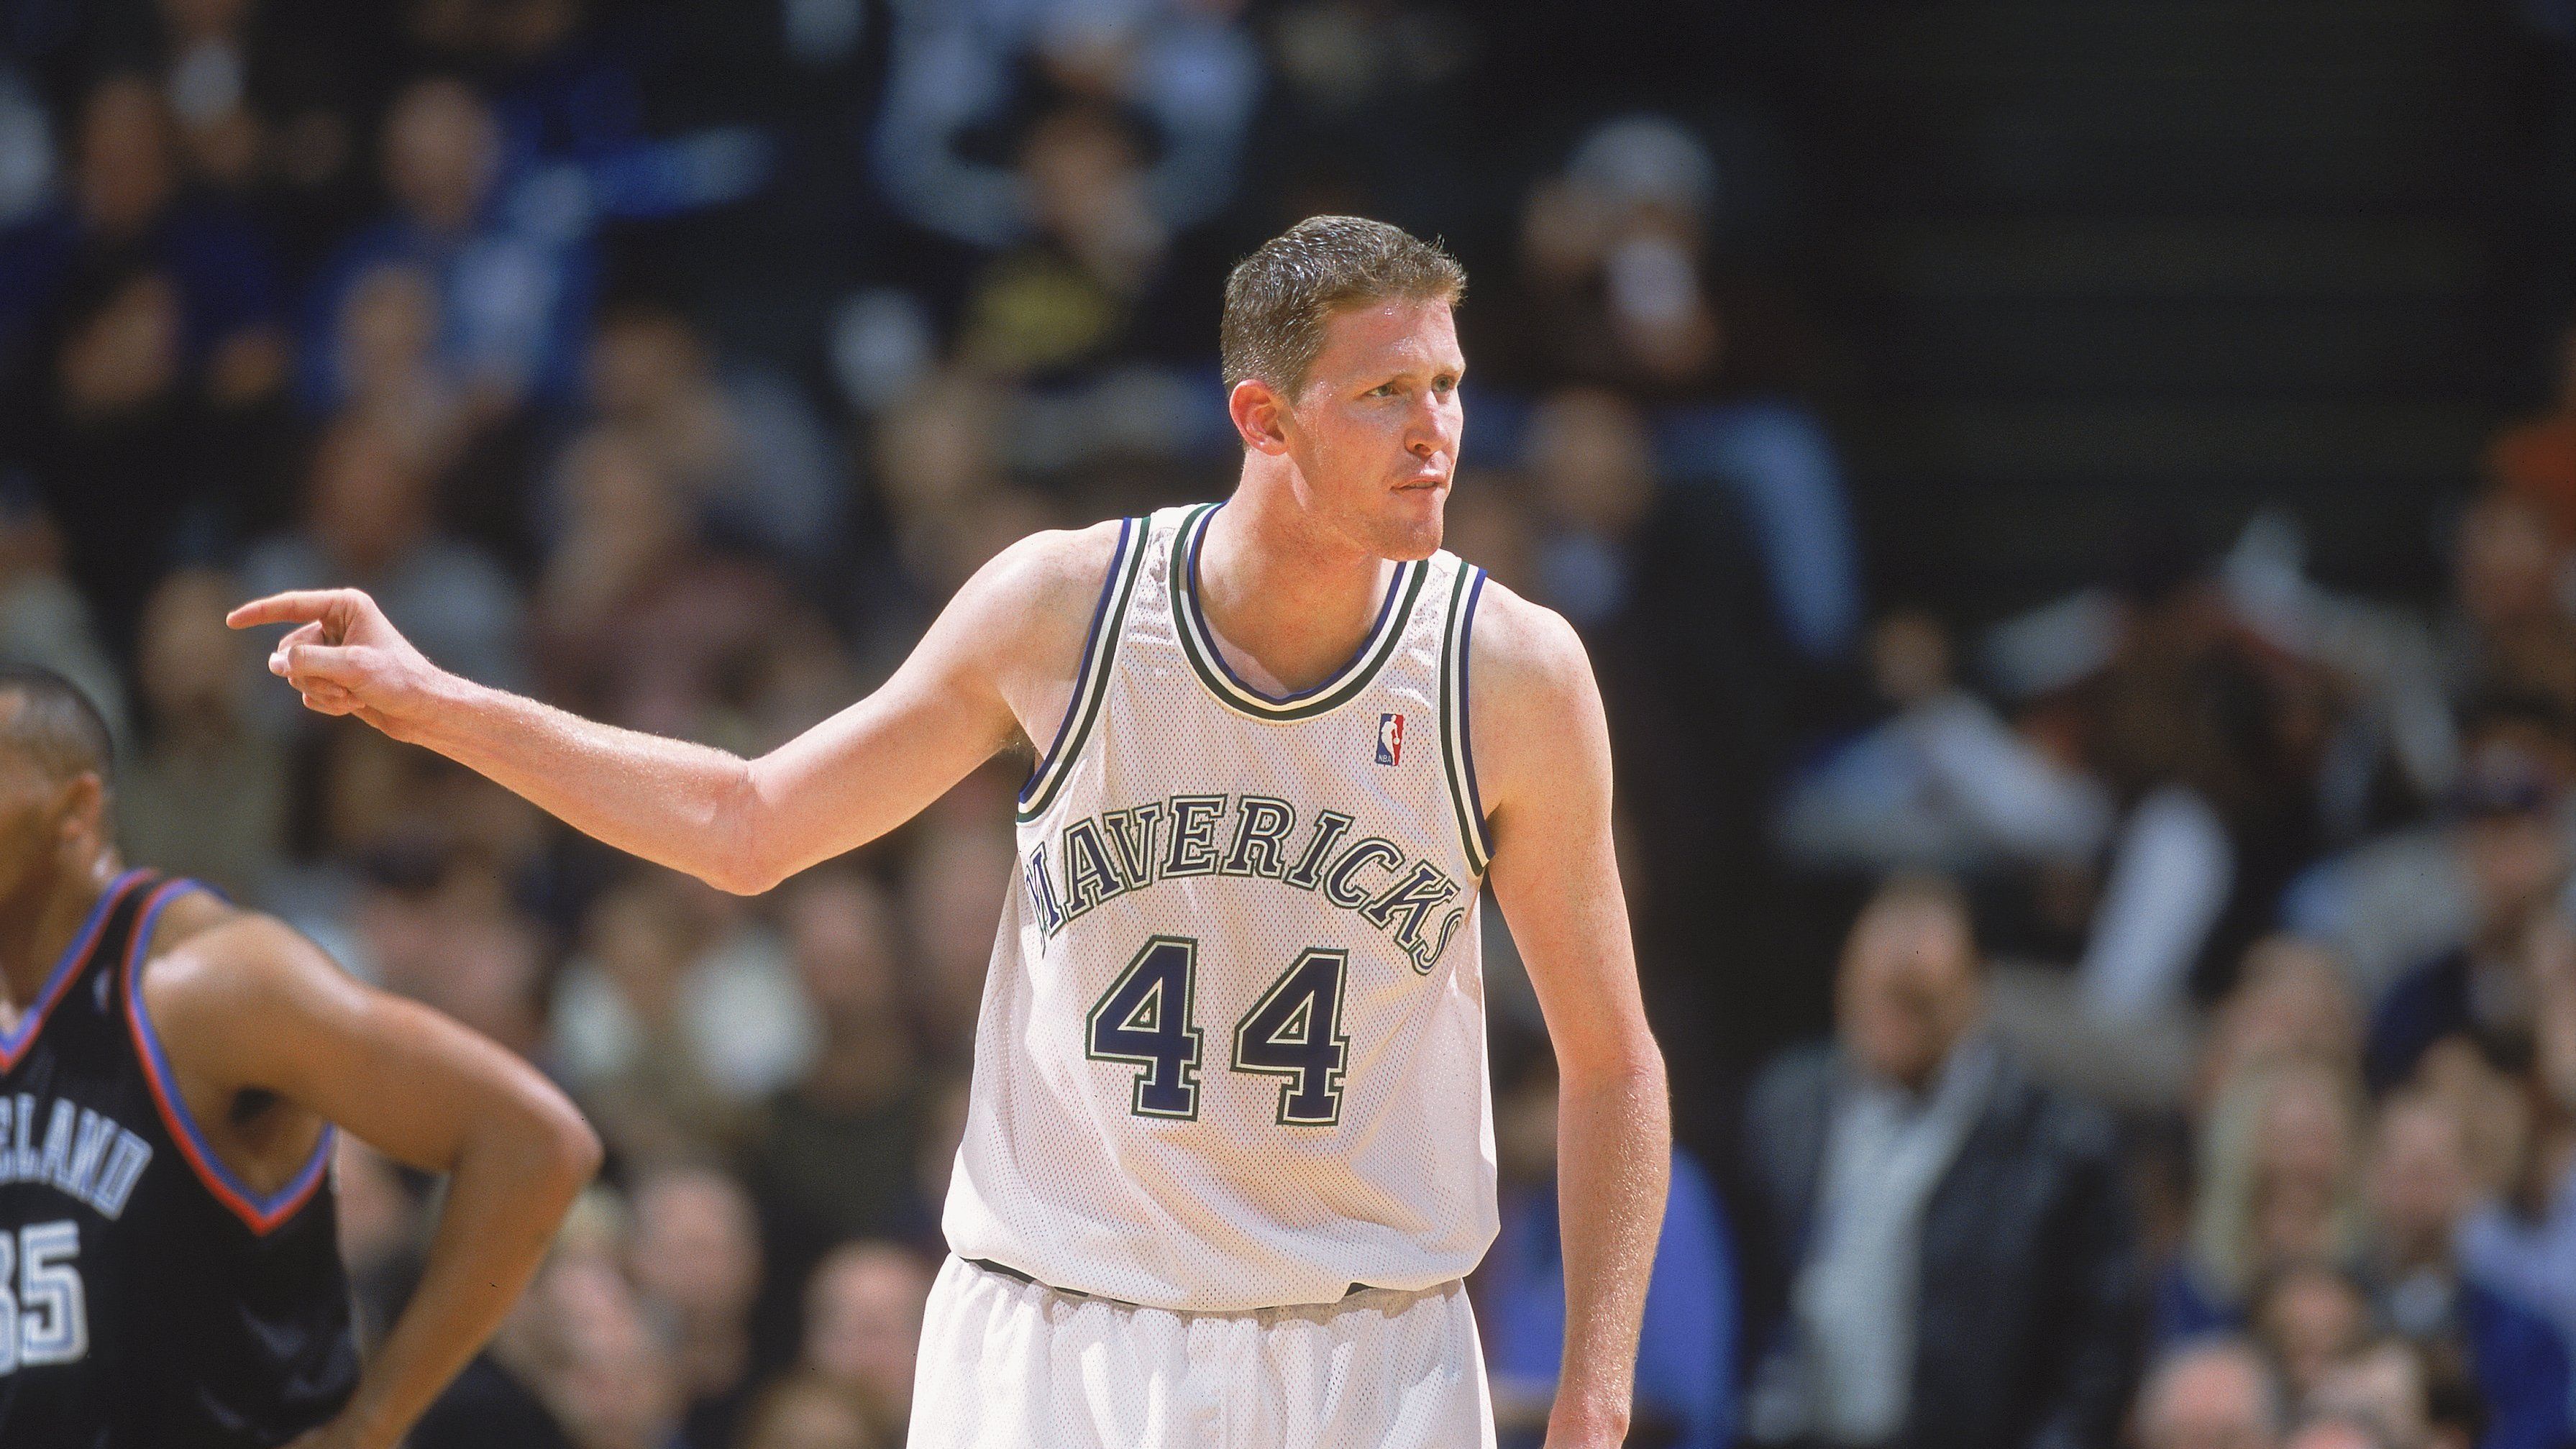 <strong>Shawn Bradley - 2,29m</strong><br><strong>Teams:</strong> Philadelphia 76ers, New Jersey Nets, Dallas Mavericks<br><strong>Karriere-Stats:</strong> 8,1 Punkte, 6,3 Rebounds, 0,7 Assists, 2,5 Blocks<br><strong>Auszeichnungen:</strong> All-Rookie-Team